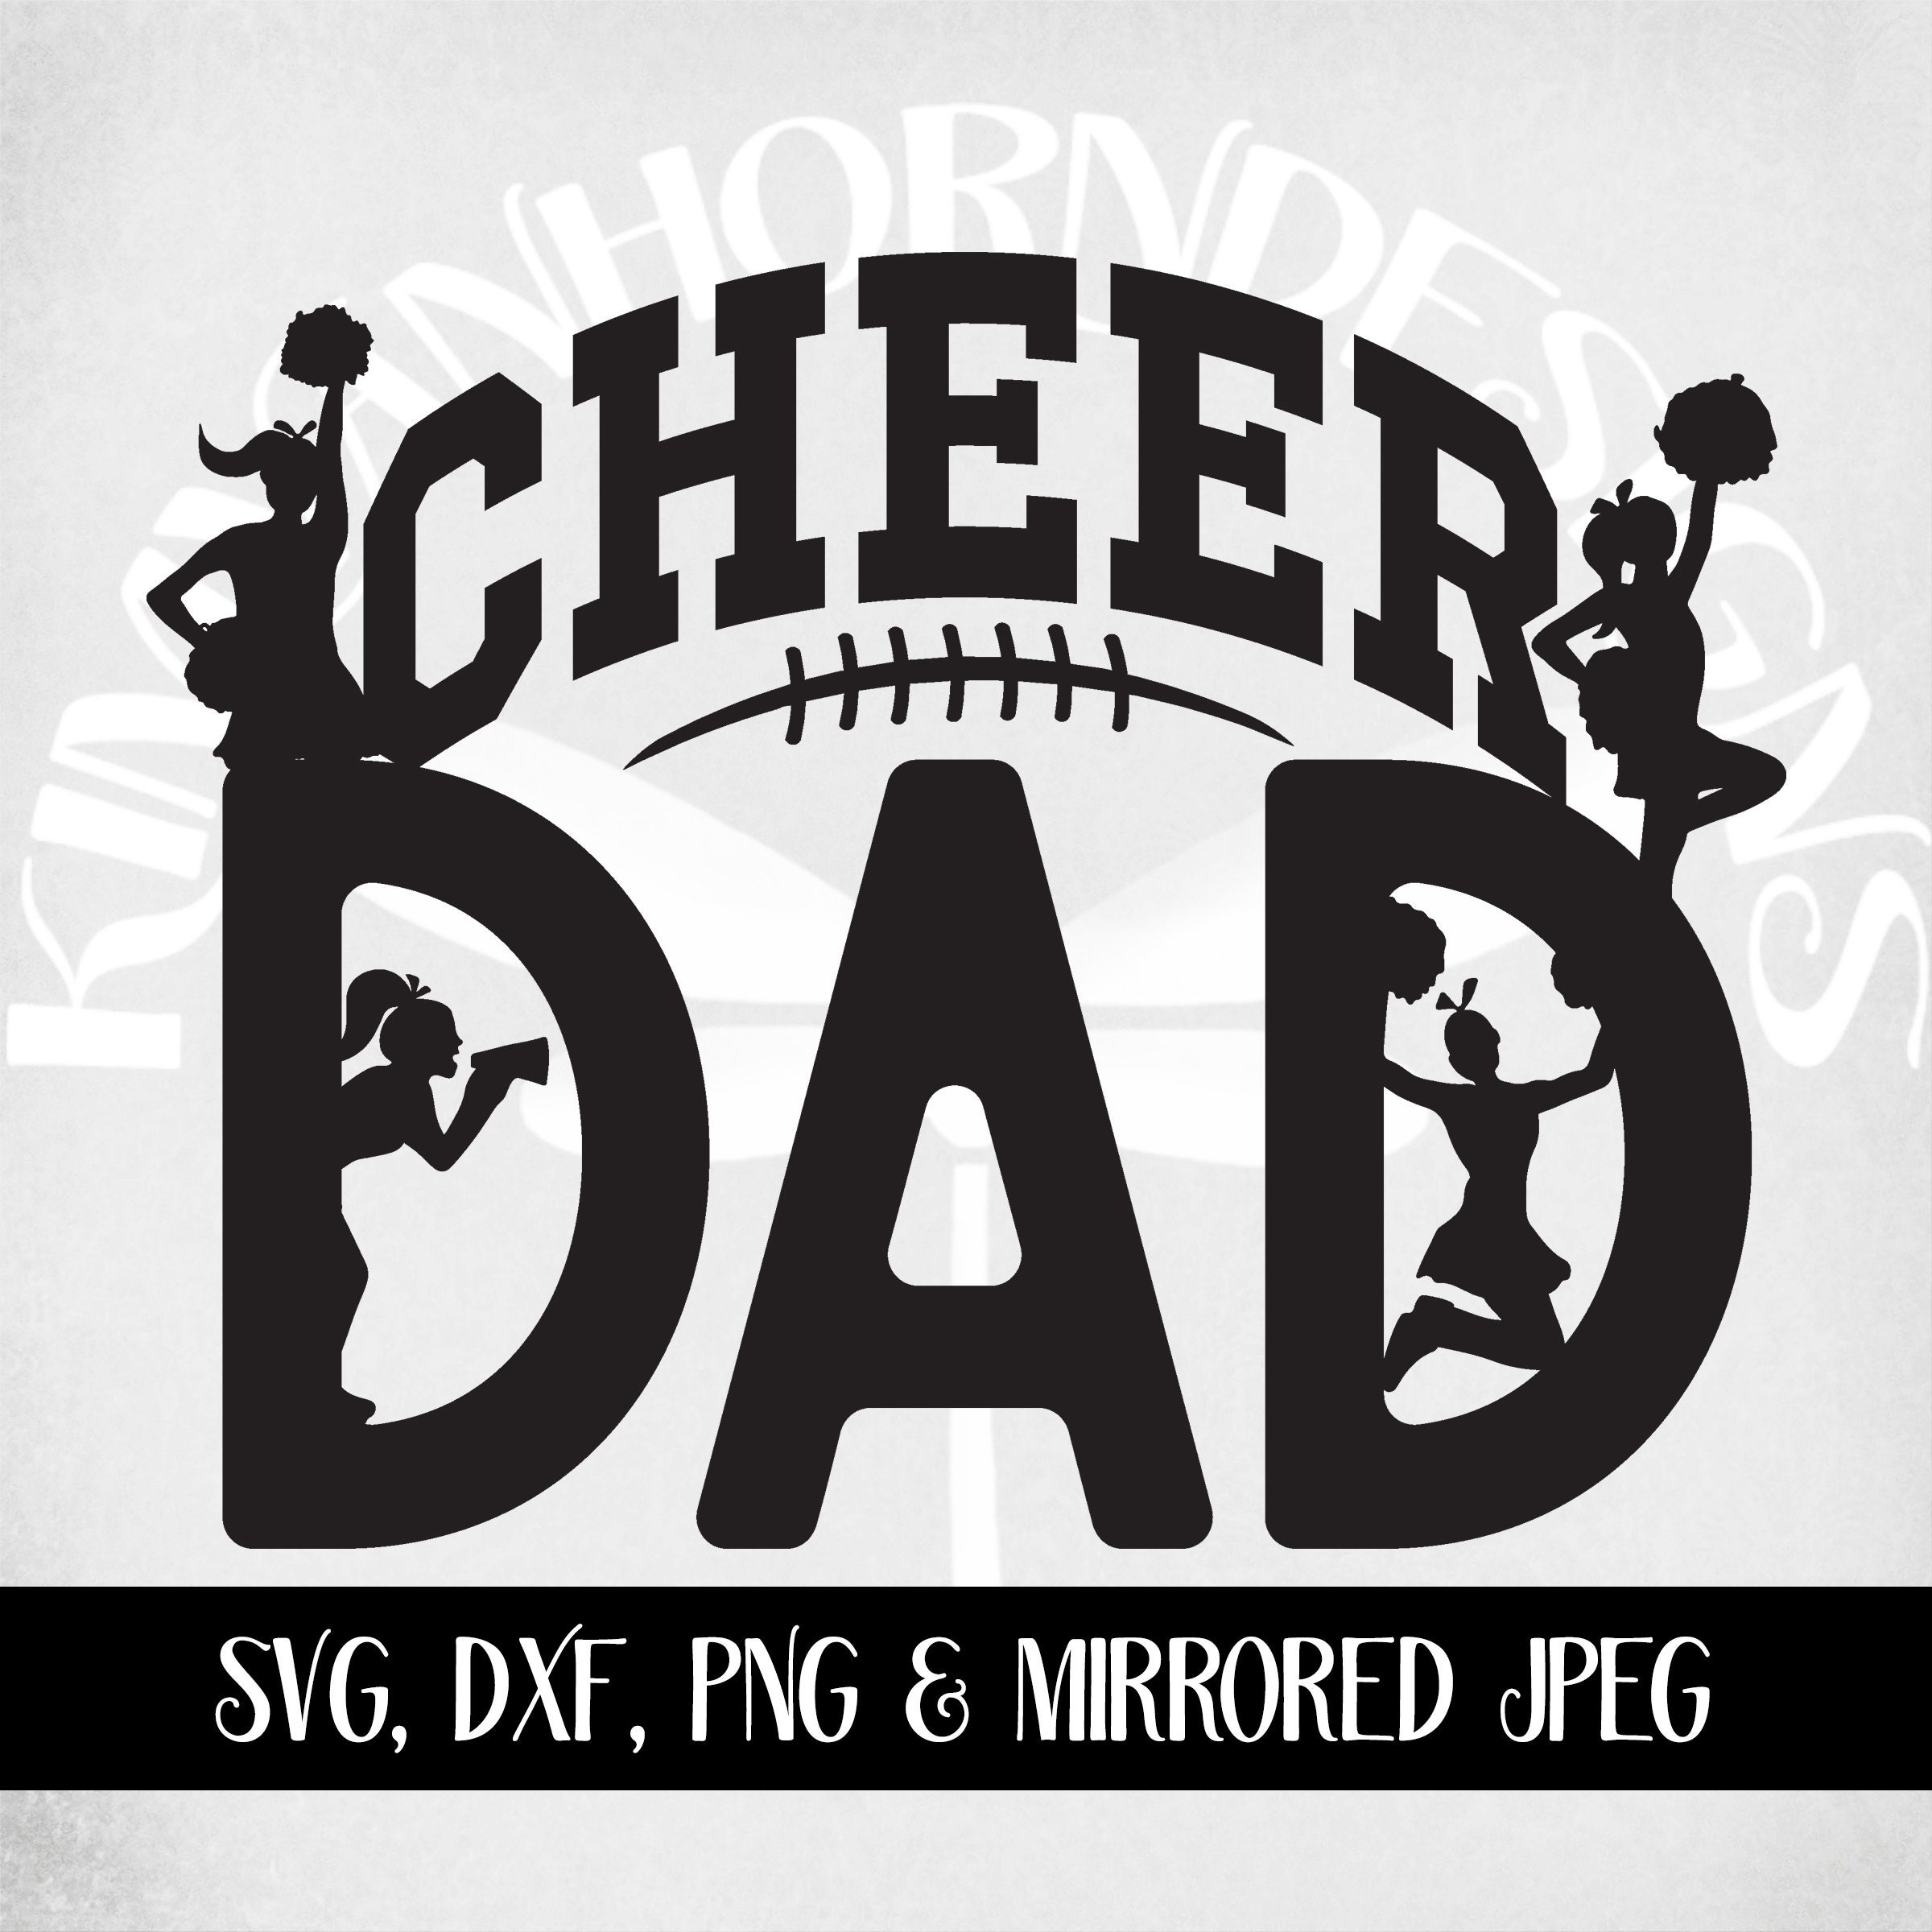 Cheer Dad SVG Cheerleader Silhouette Svg Dxf Png Mirrored - Etsy